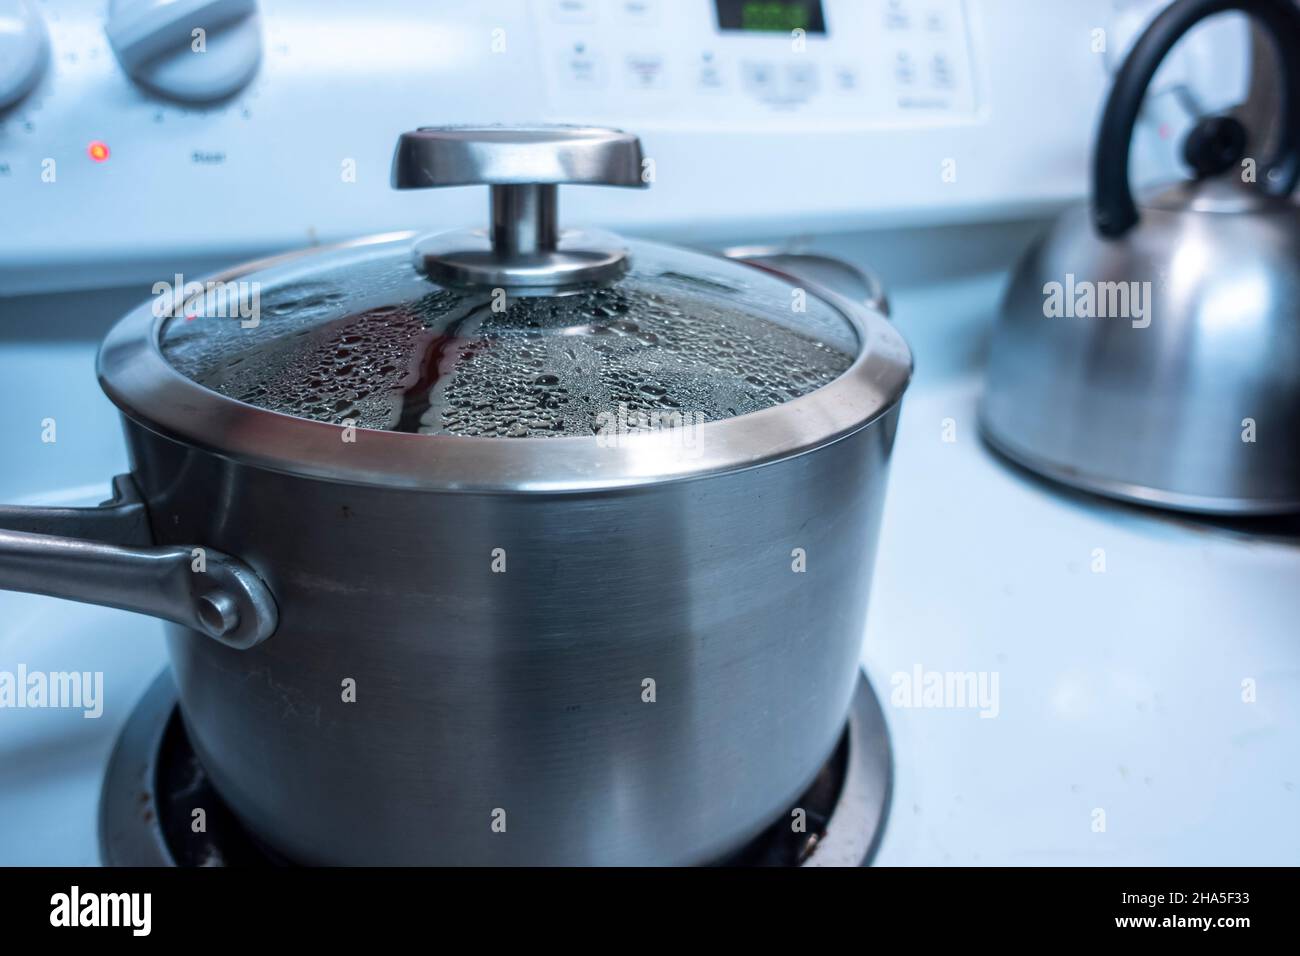 https://c8.alamy.com/comp/2HA5F33/close-up-view-of-a-large-silver-pot-with-the-lid-on-steam-forming-inside-as-it-keeps-a-cooked-meal-warm-on-a-stove-top-2HA5F33.jpg